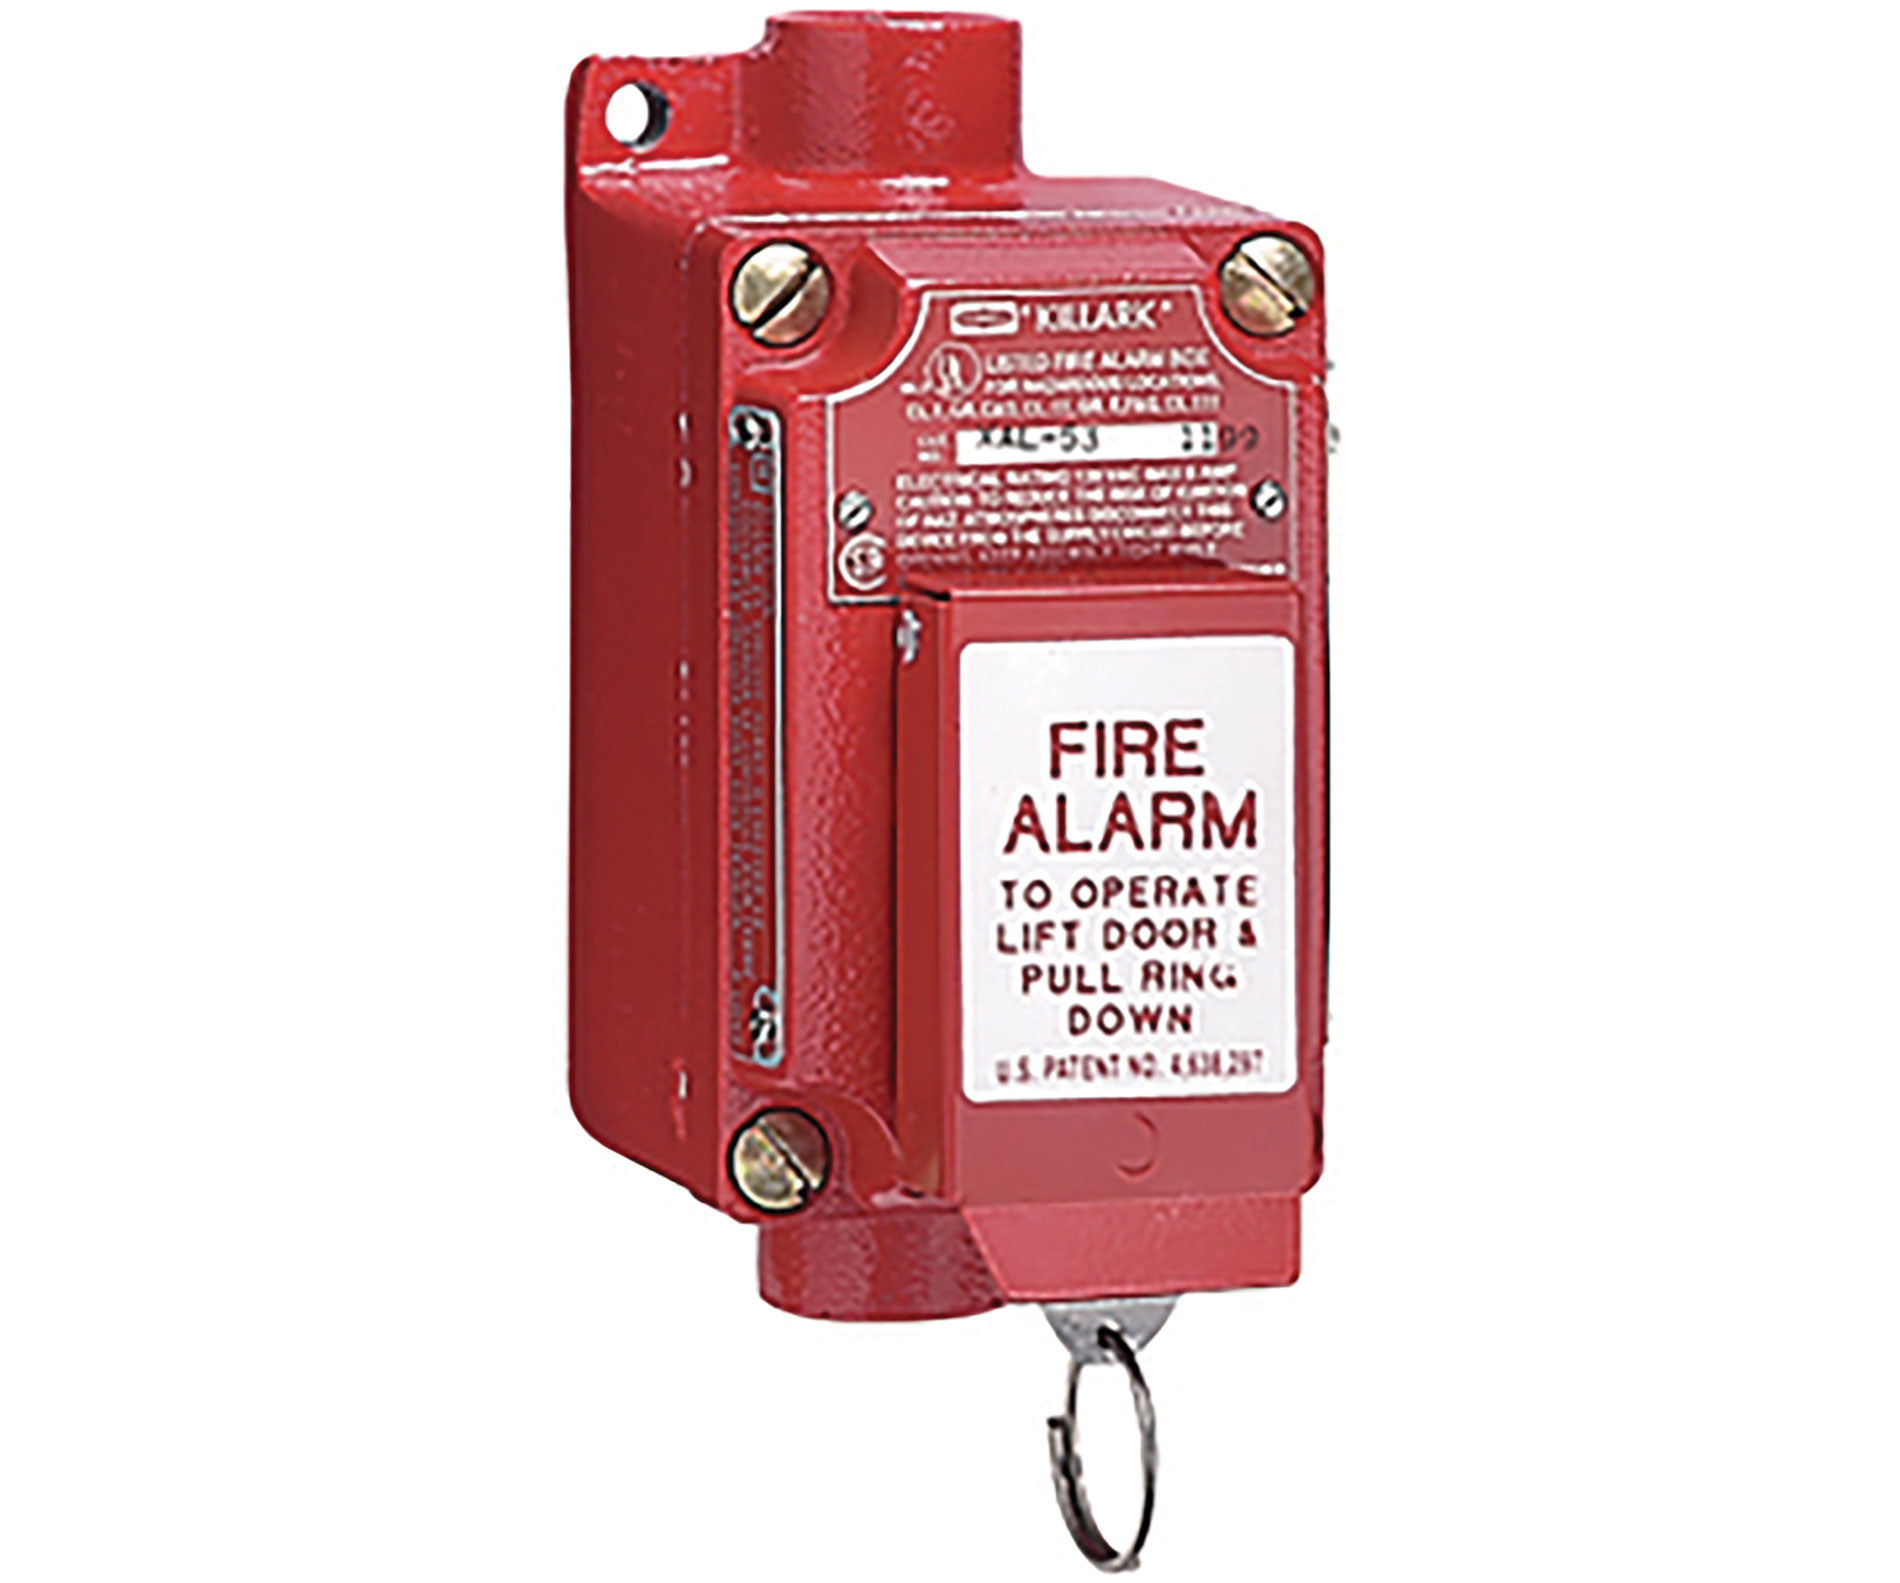 Hubbell Fire Alarm